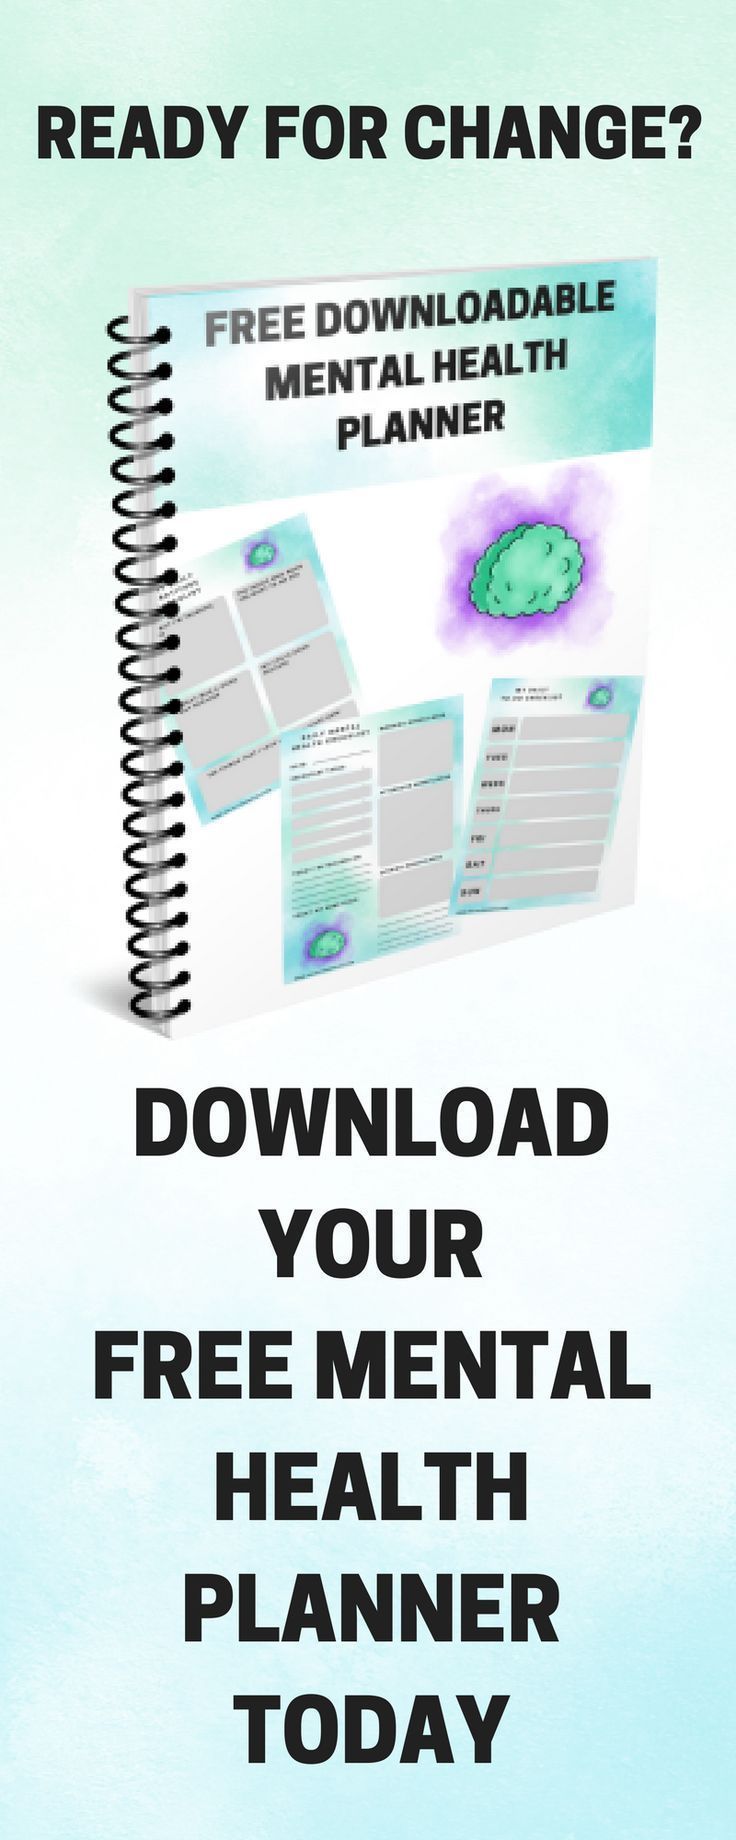 Psychology-Infographic-Grab-your-free-mental-health-planner-now-and-start-getting-back-to-yourself Psychology Infographic : Grab your free mental health planner now and start getting back to yourself.